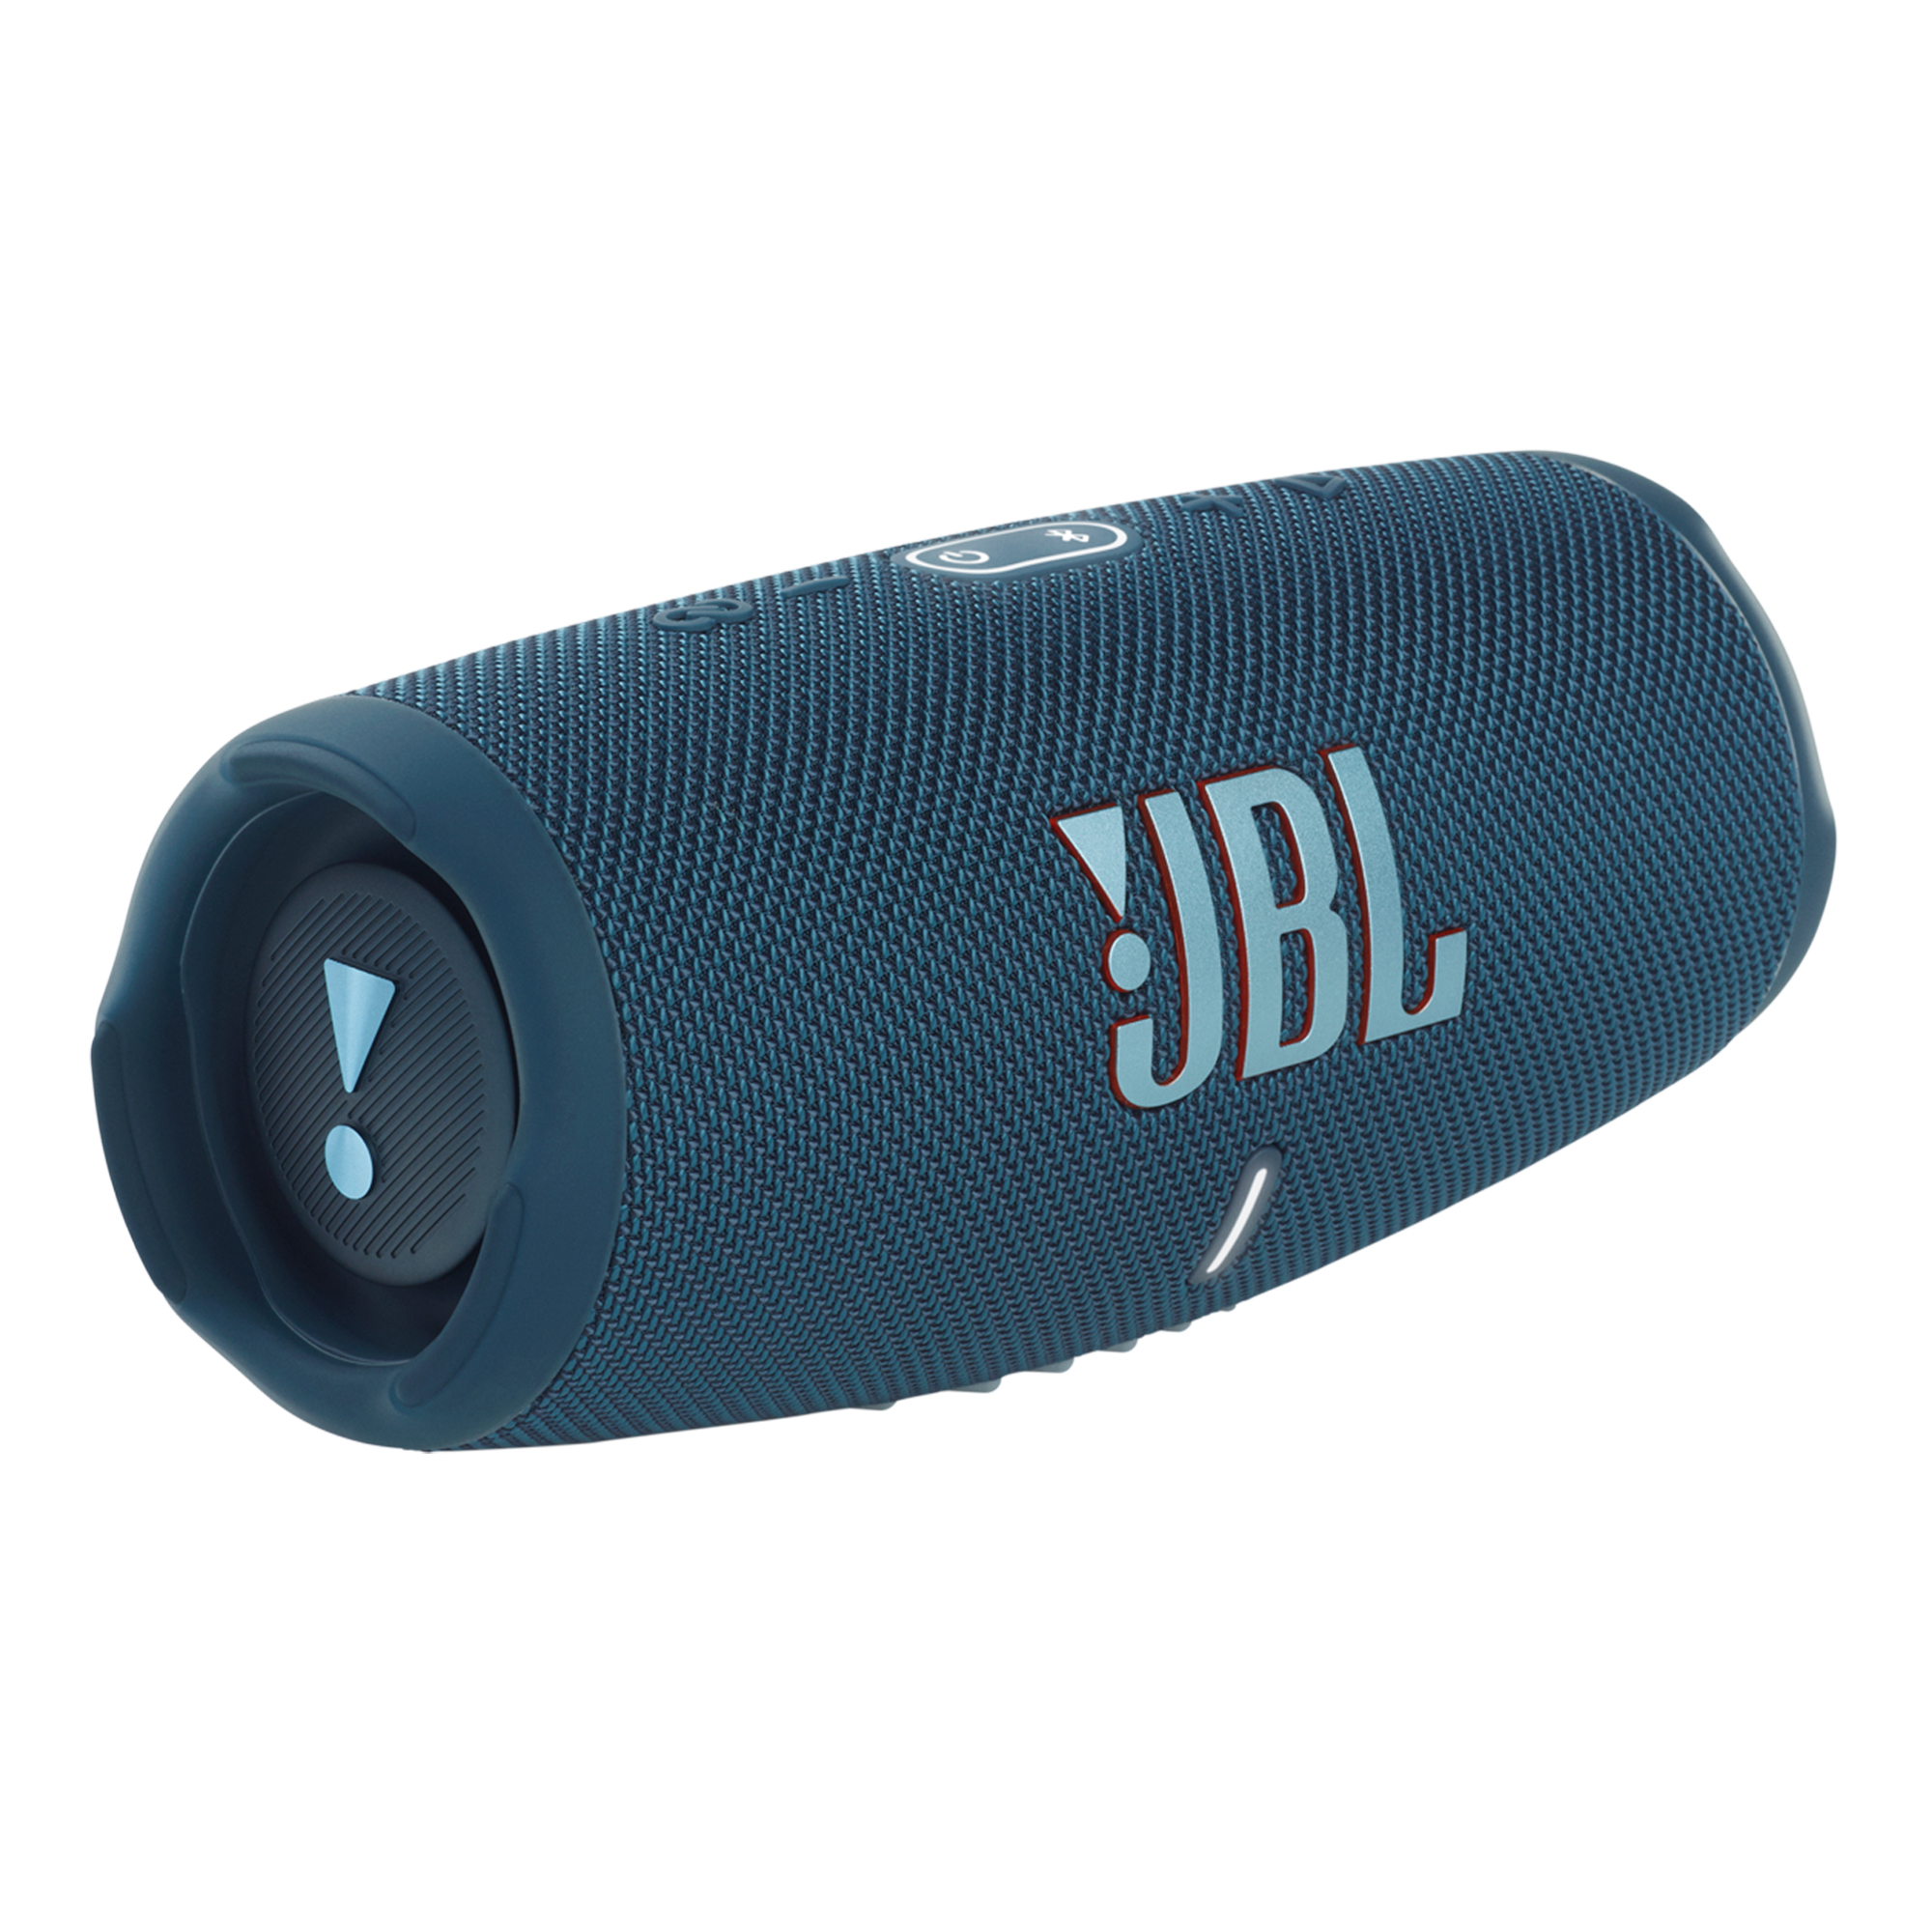 Parlante Inalmbrico Bluetooth Jbl Charge 5 Ip67 30w